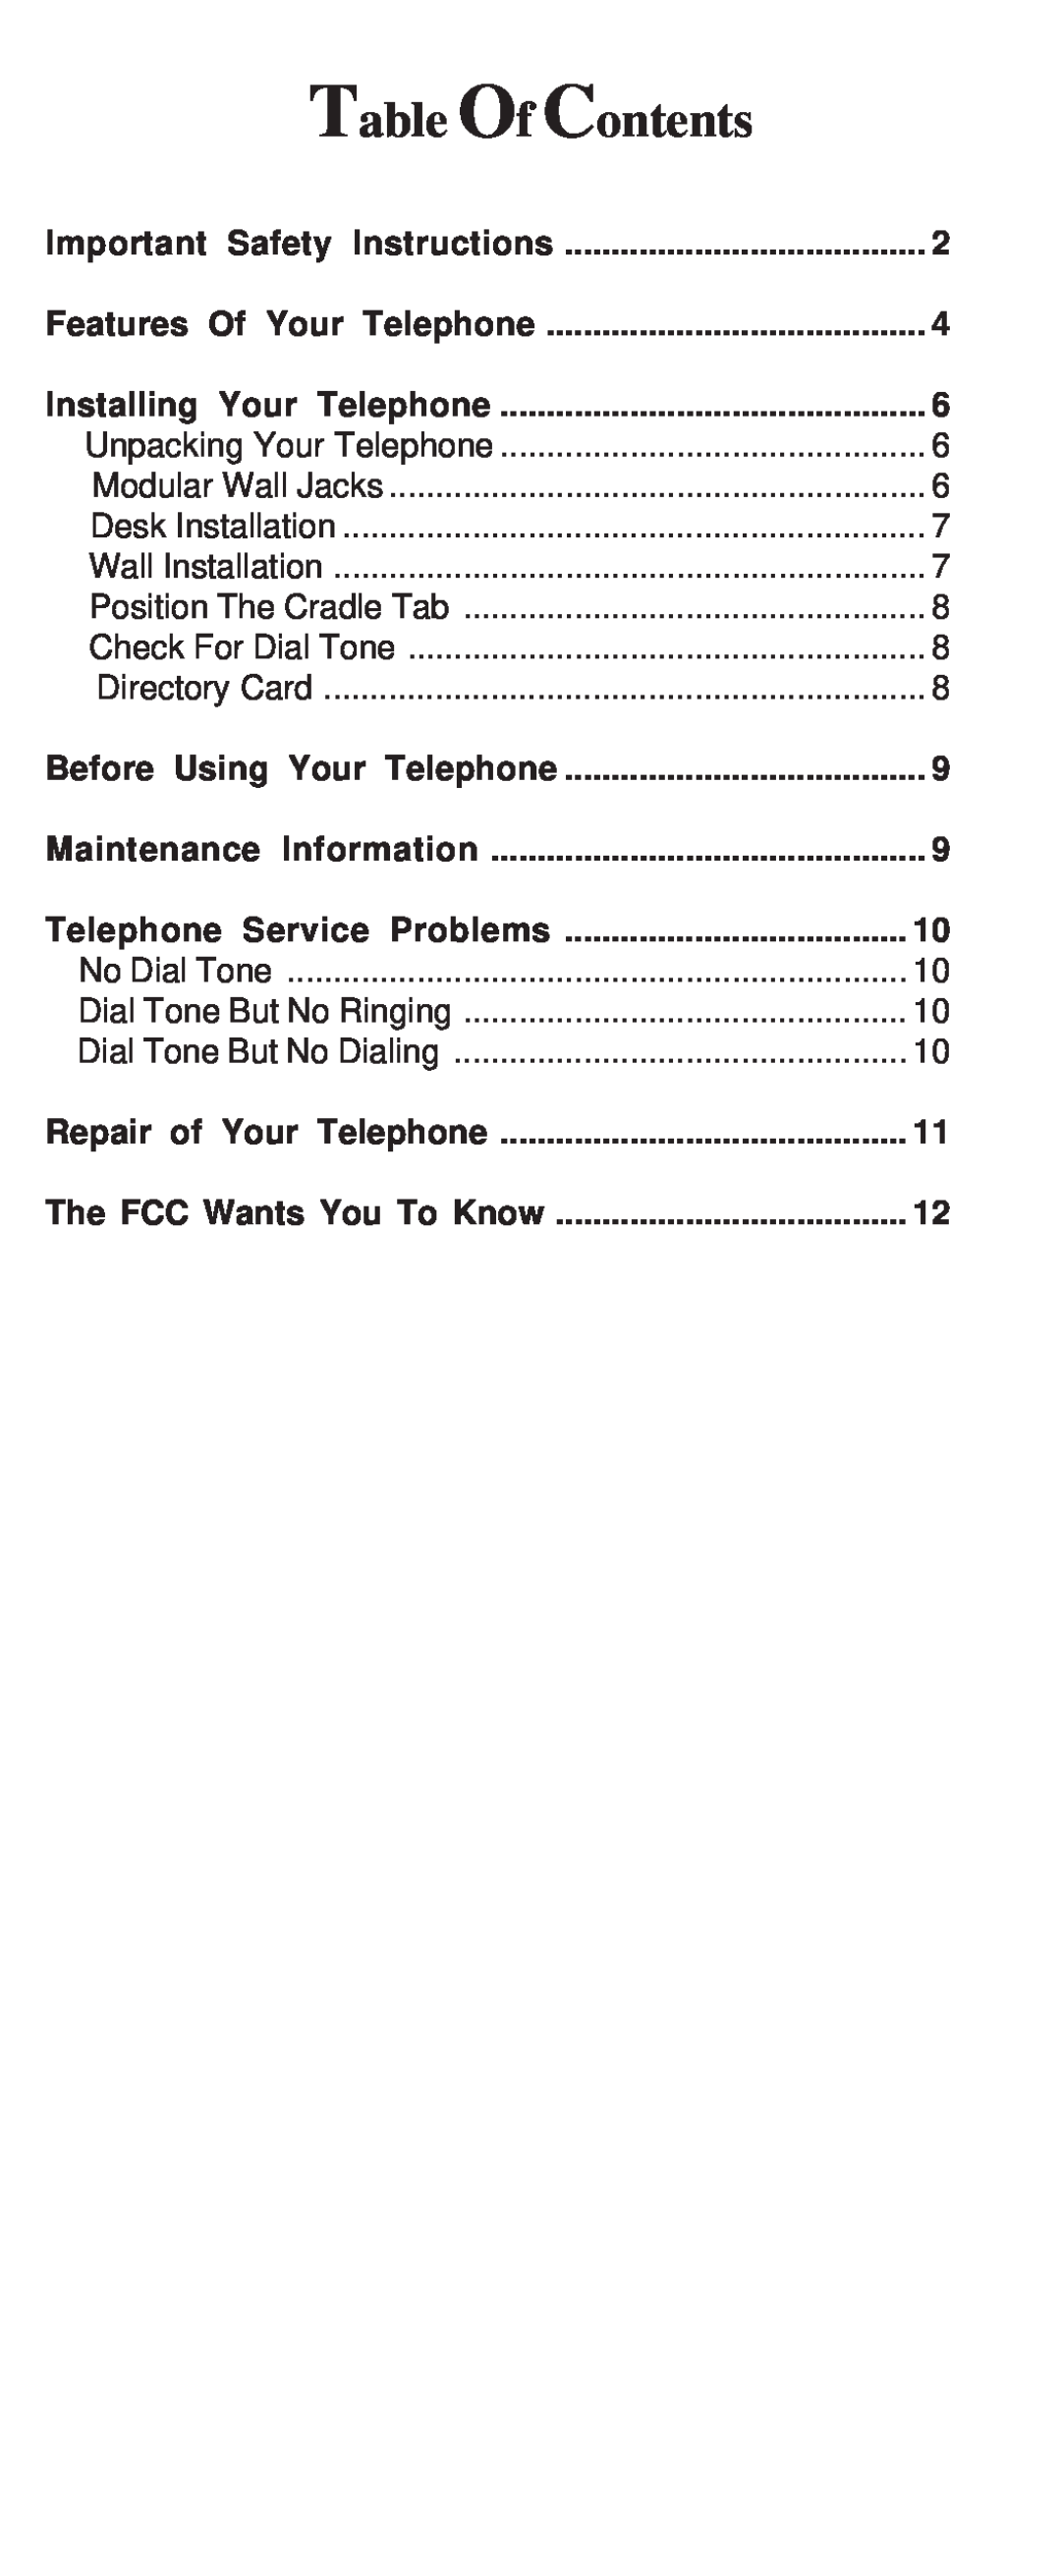 Cortelco 8150 Table Of Contents, Telephone Service Problems, Repair of Your Telephone, The FCC Wants You To Know 